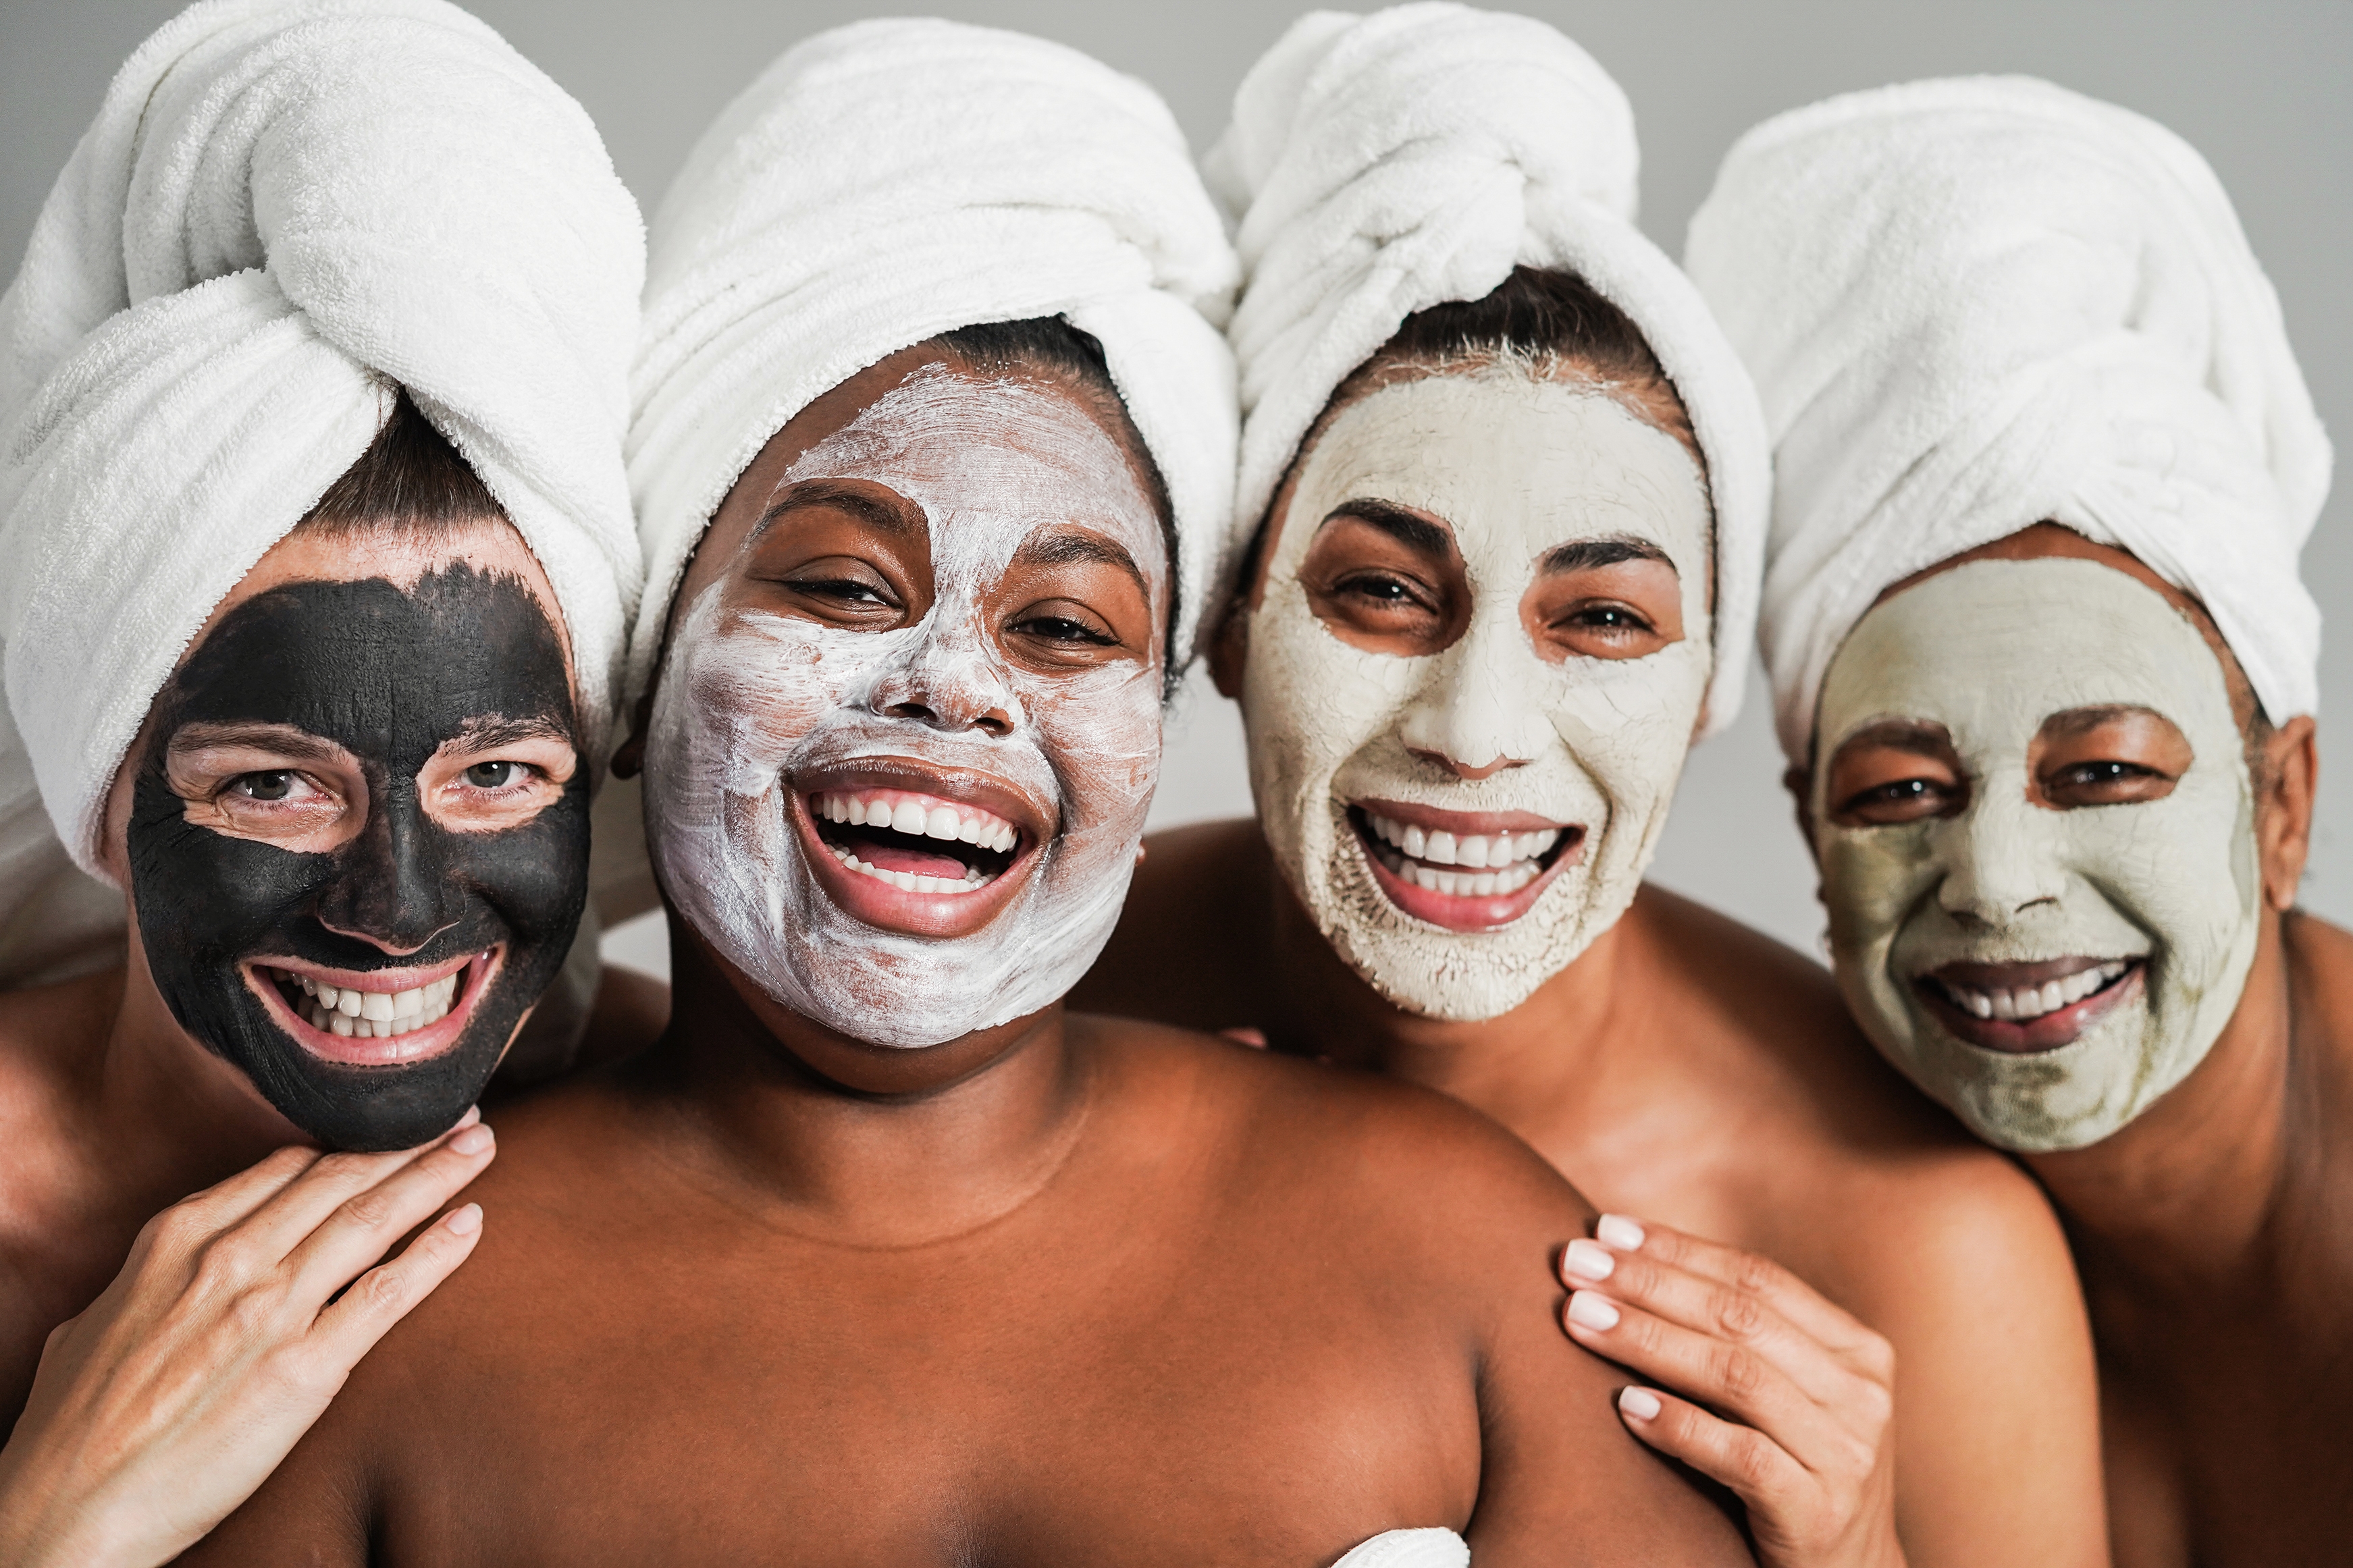 Models with facial masks | Source: Shutterstock